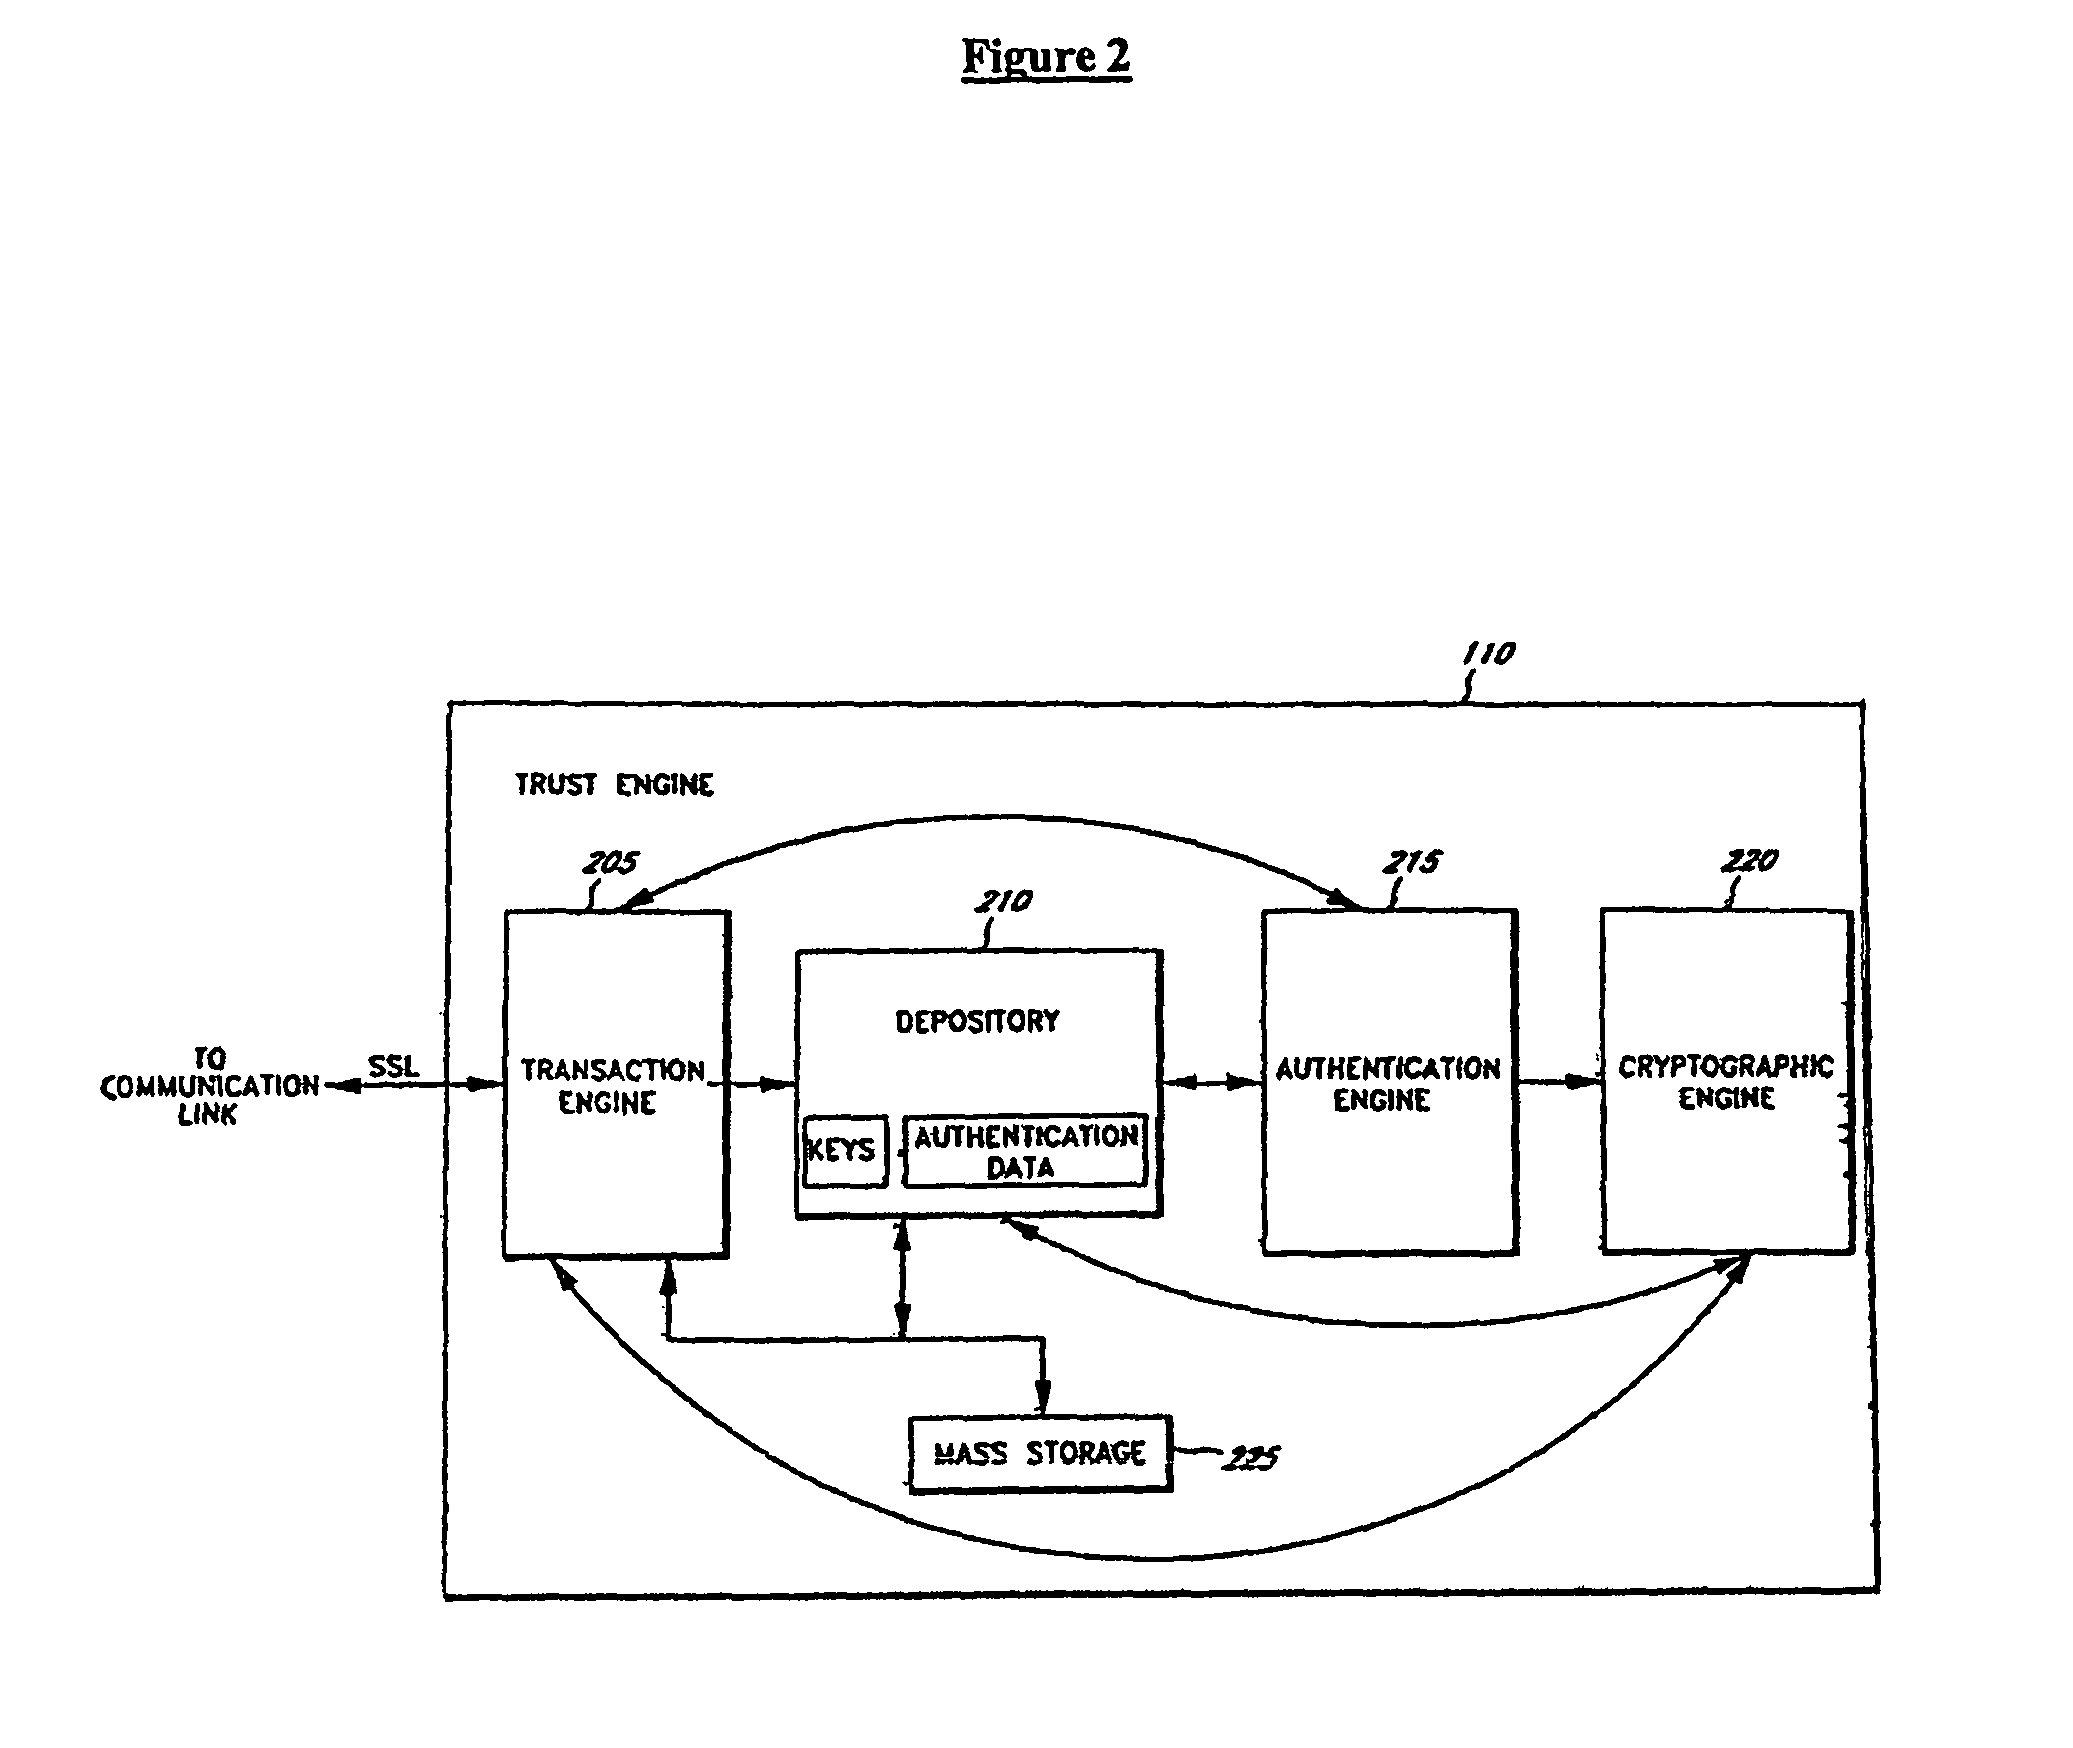 Systems and methods for distributing and securing data